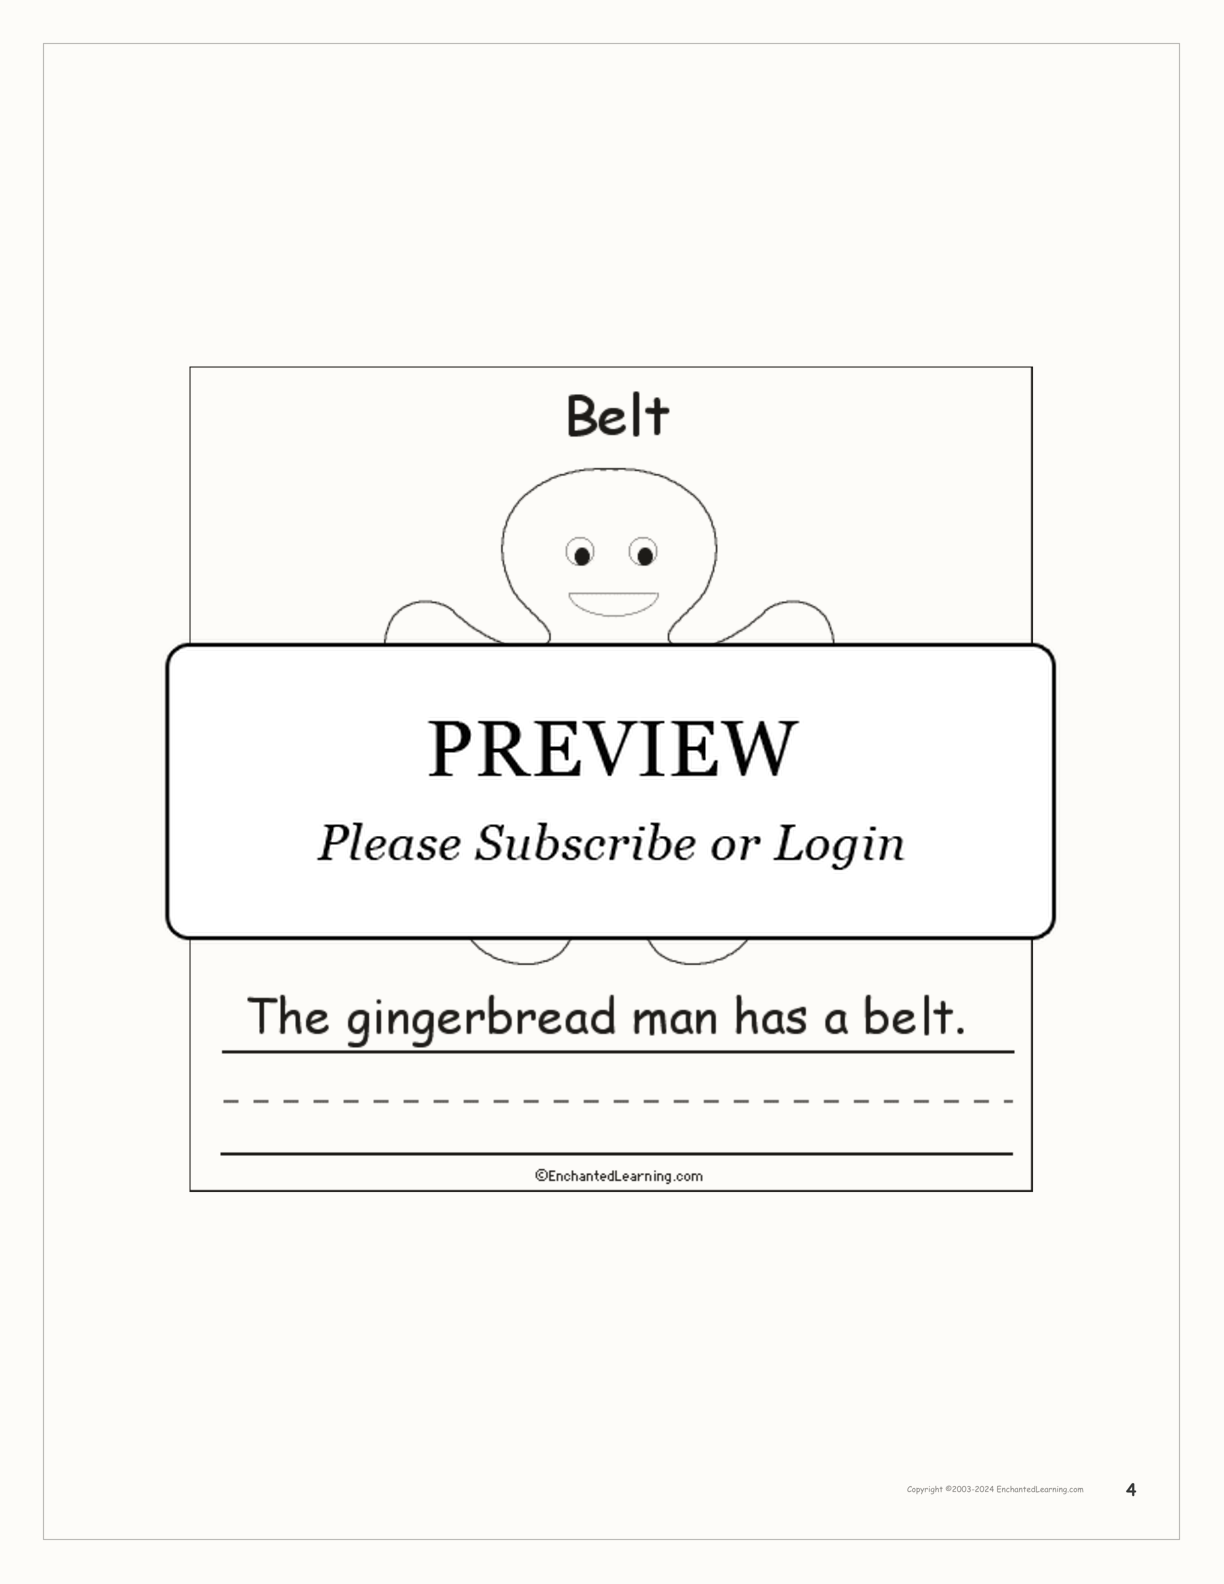 The Gingerbread Man's Clothes: Early Reader Book interactive worksheet page 4